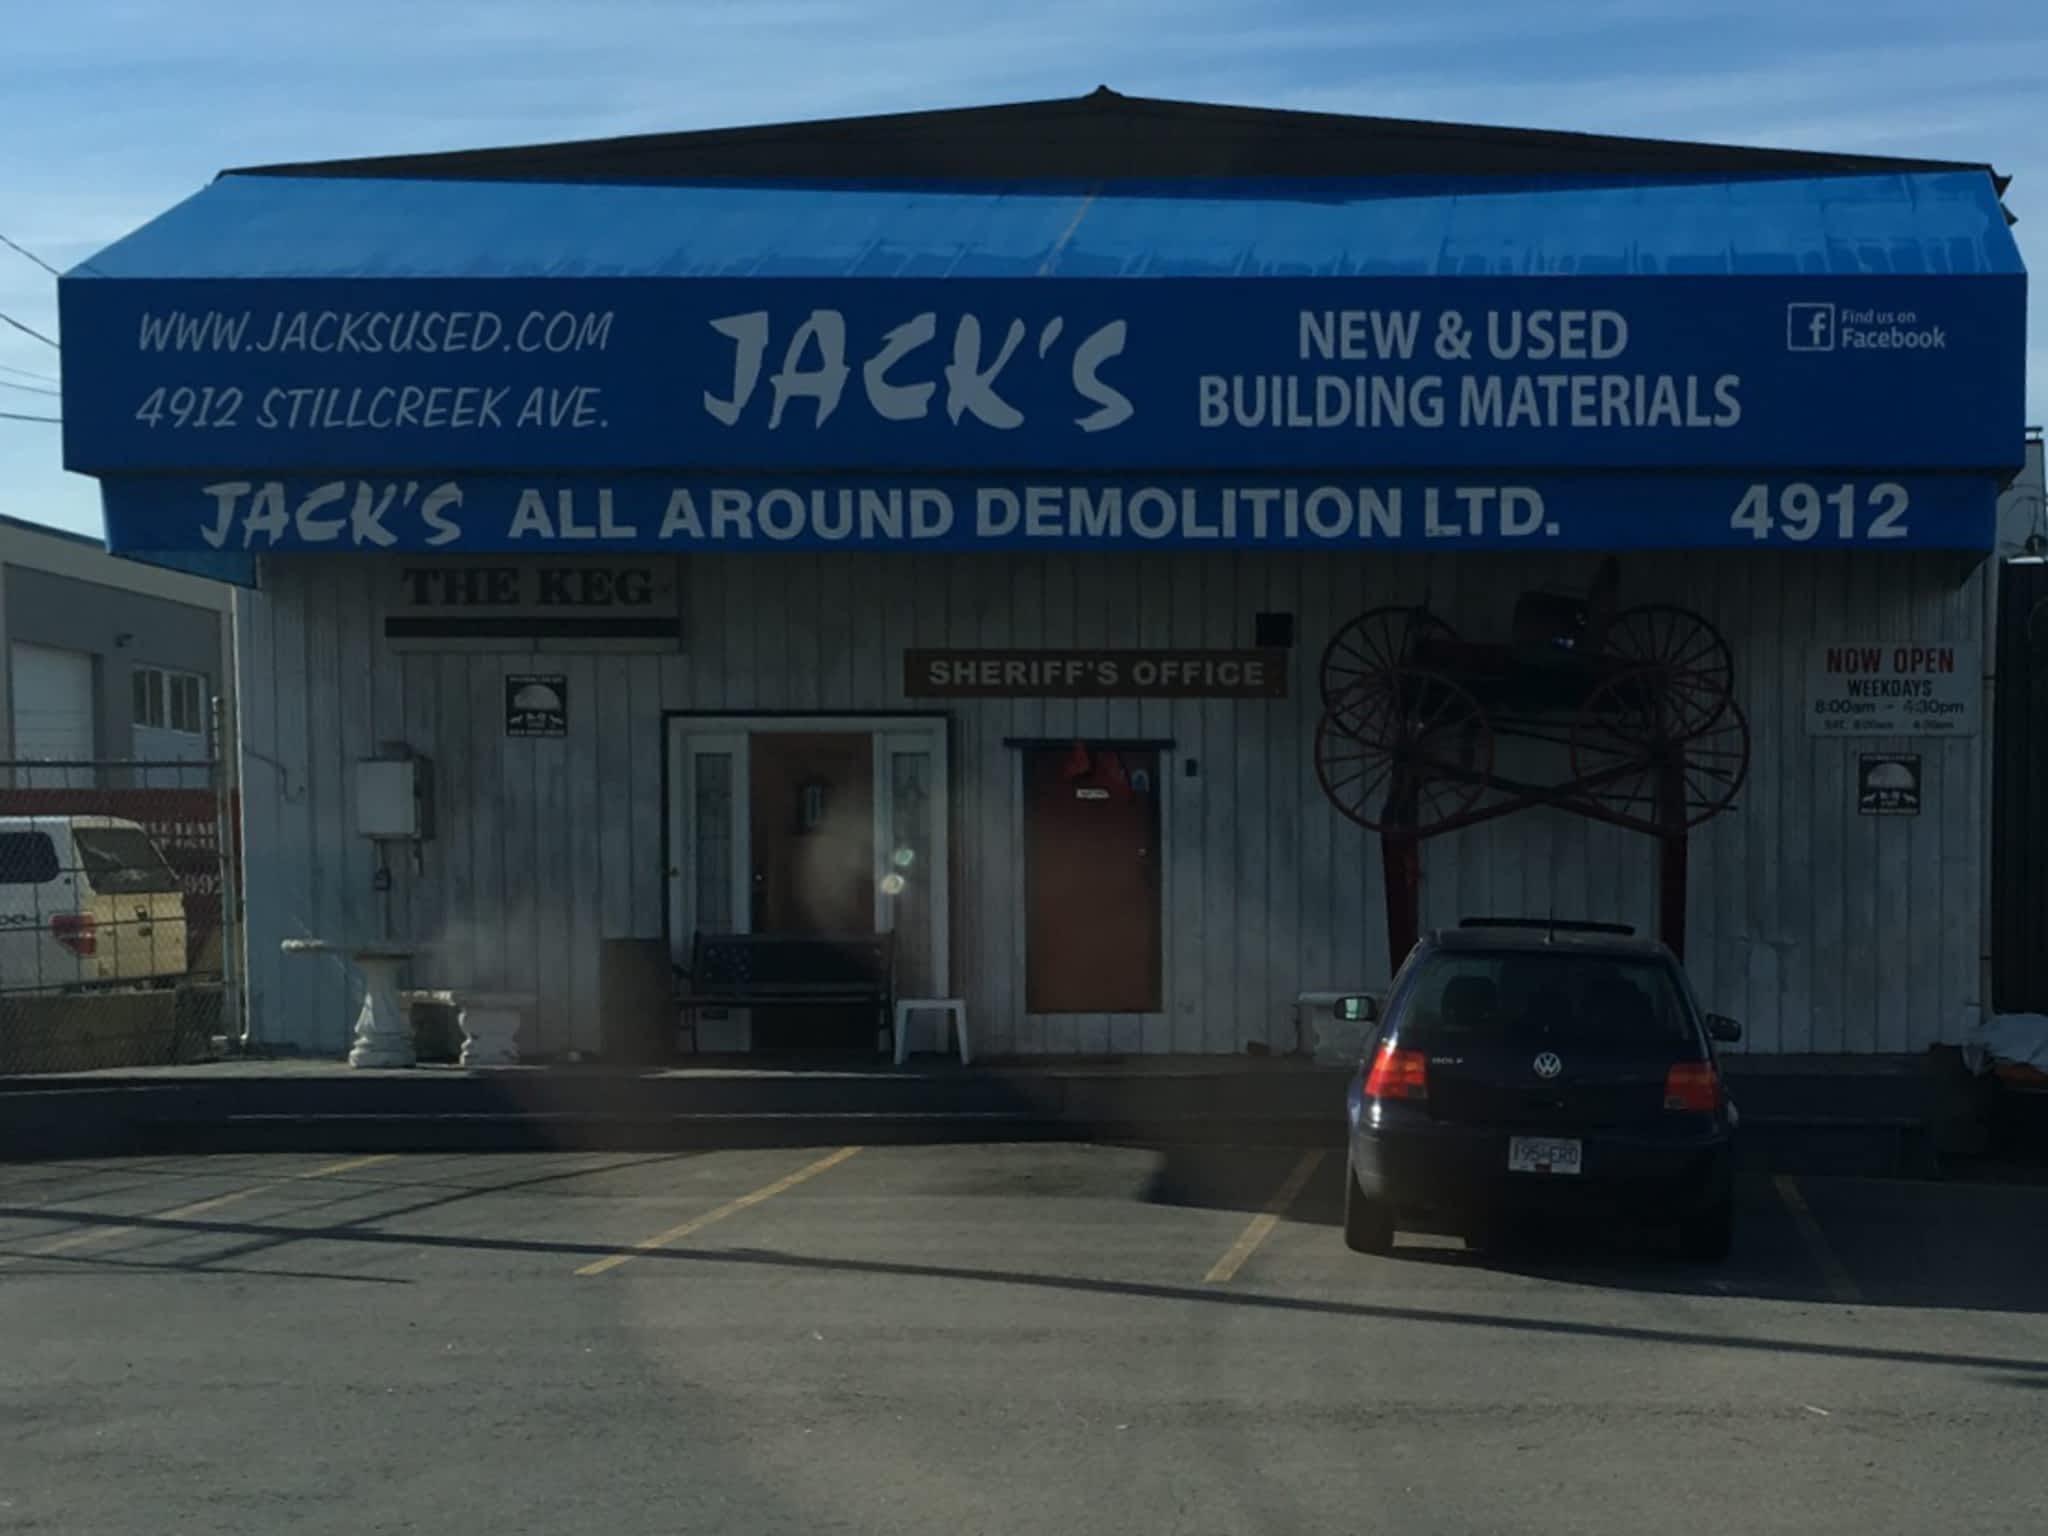 photo Jack's New & Used Building Materials Ltd